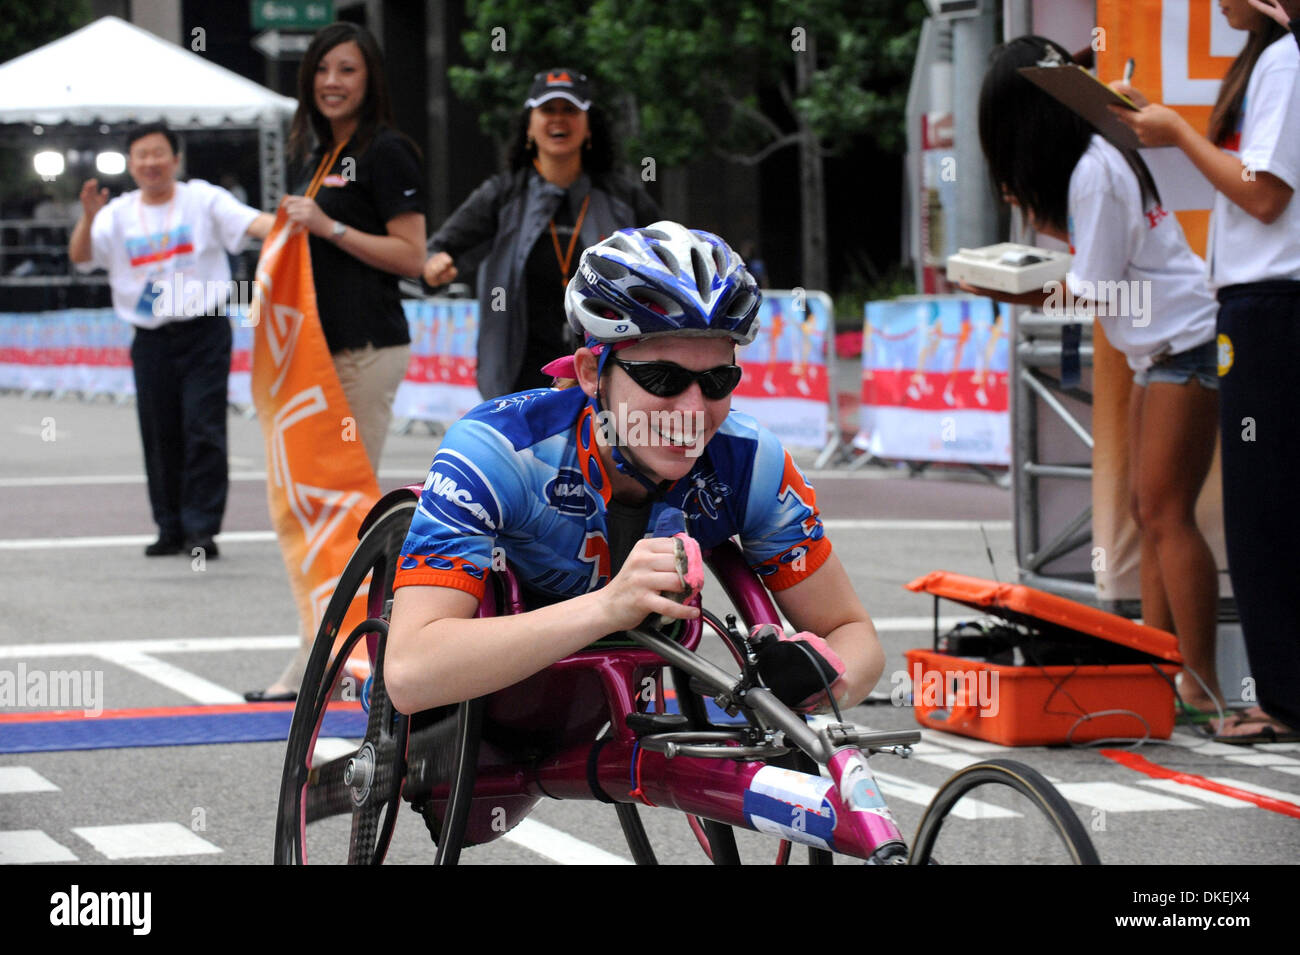 May 25, 2009 - Los Angeles, California, USA - Wheelchair racer, AMANDA MCGRORY, of Savoy, Indiana, crosses the finish line and places third overall in the wheelchair race at the 24th Annual Los Angeles Marathon.   McGRORY had a time of 1:48:13 and averaged 4:07:07 per mile over the 26.2 mile course.  (Credit Image: © Scott Mitchell/ZUMA Press) Stock Photo